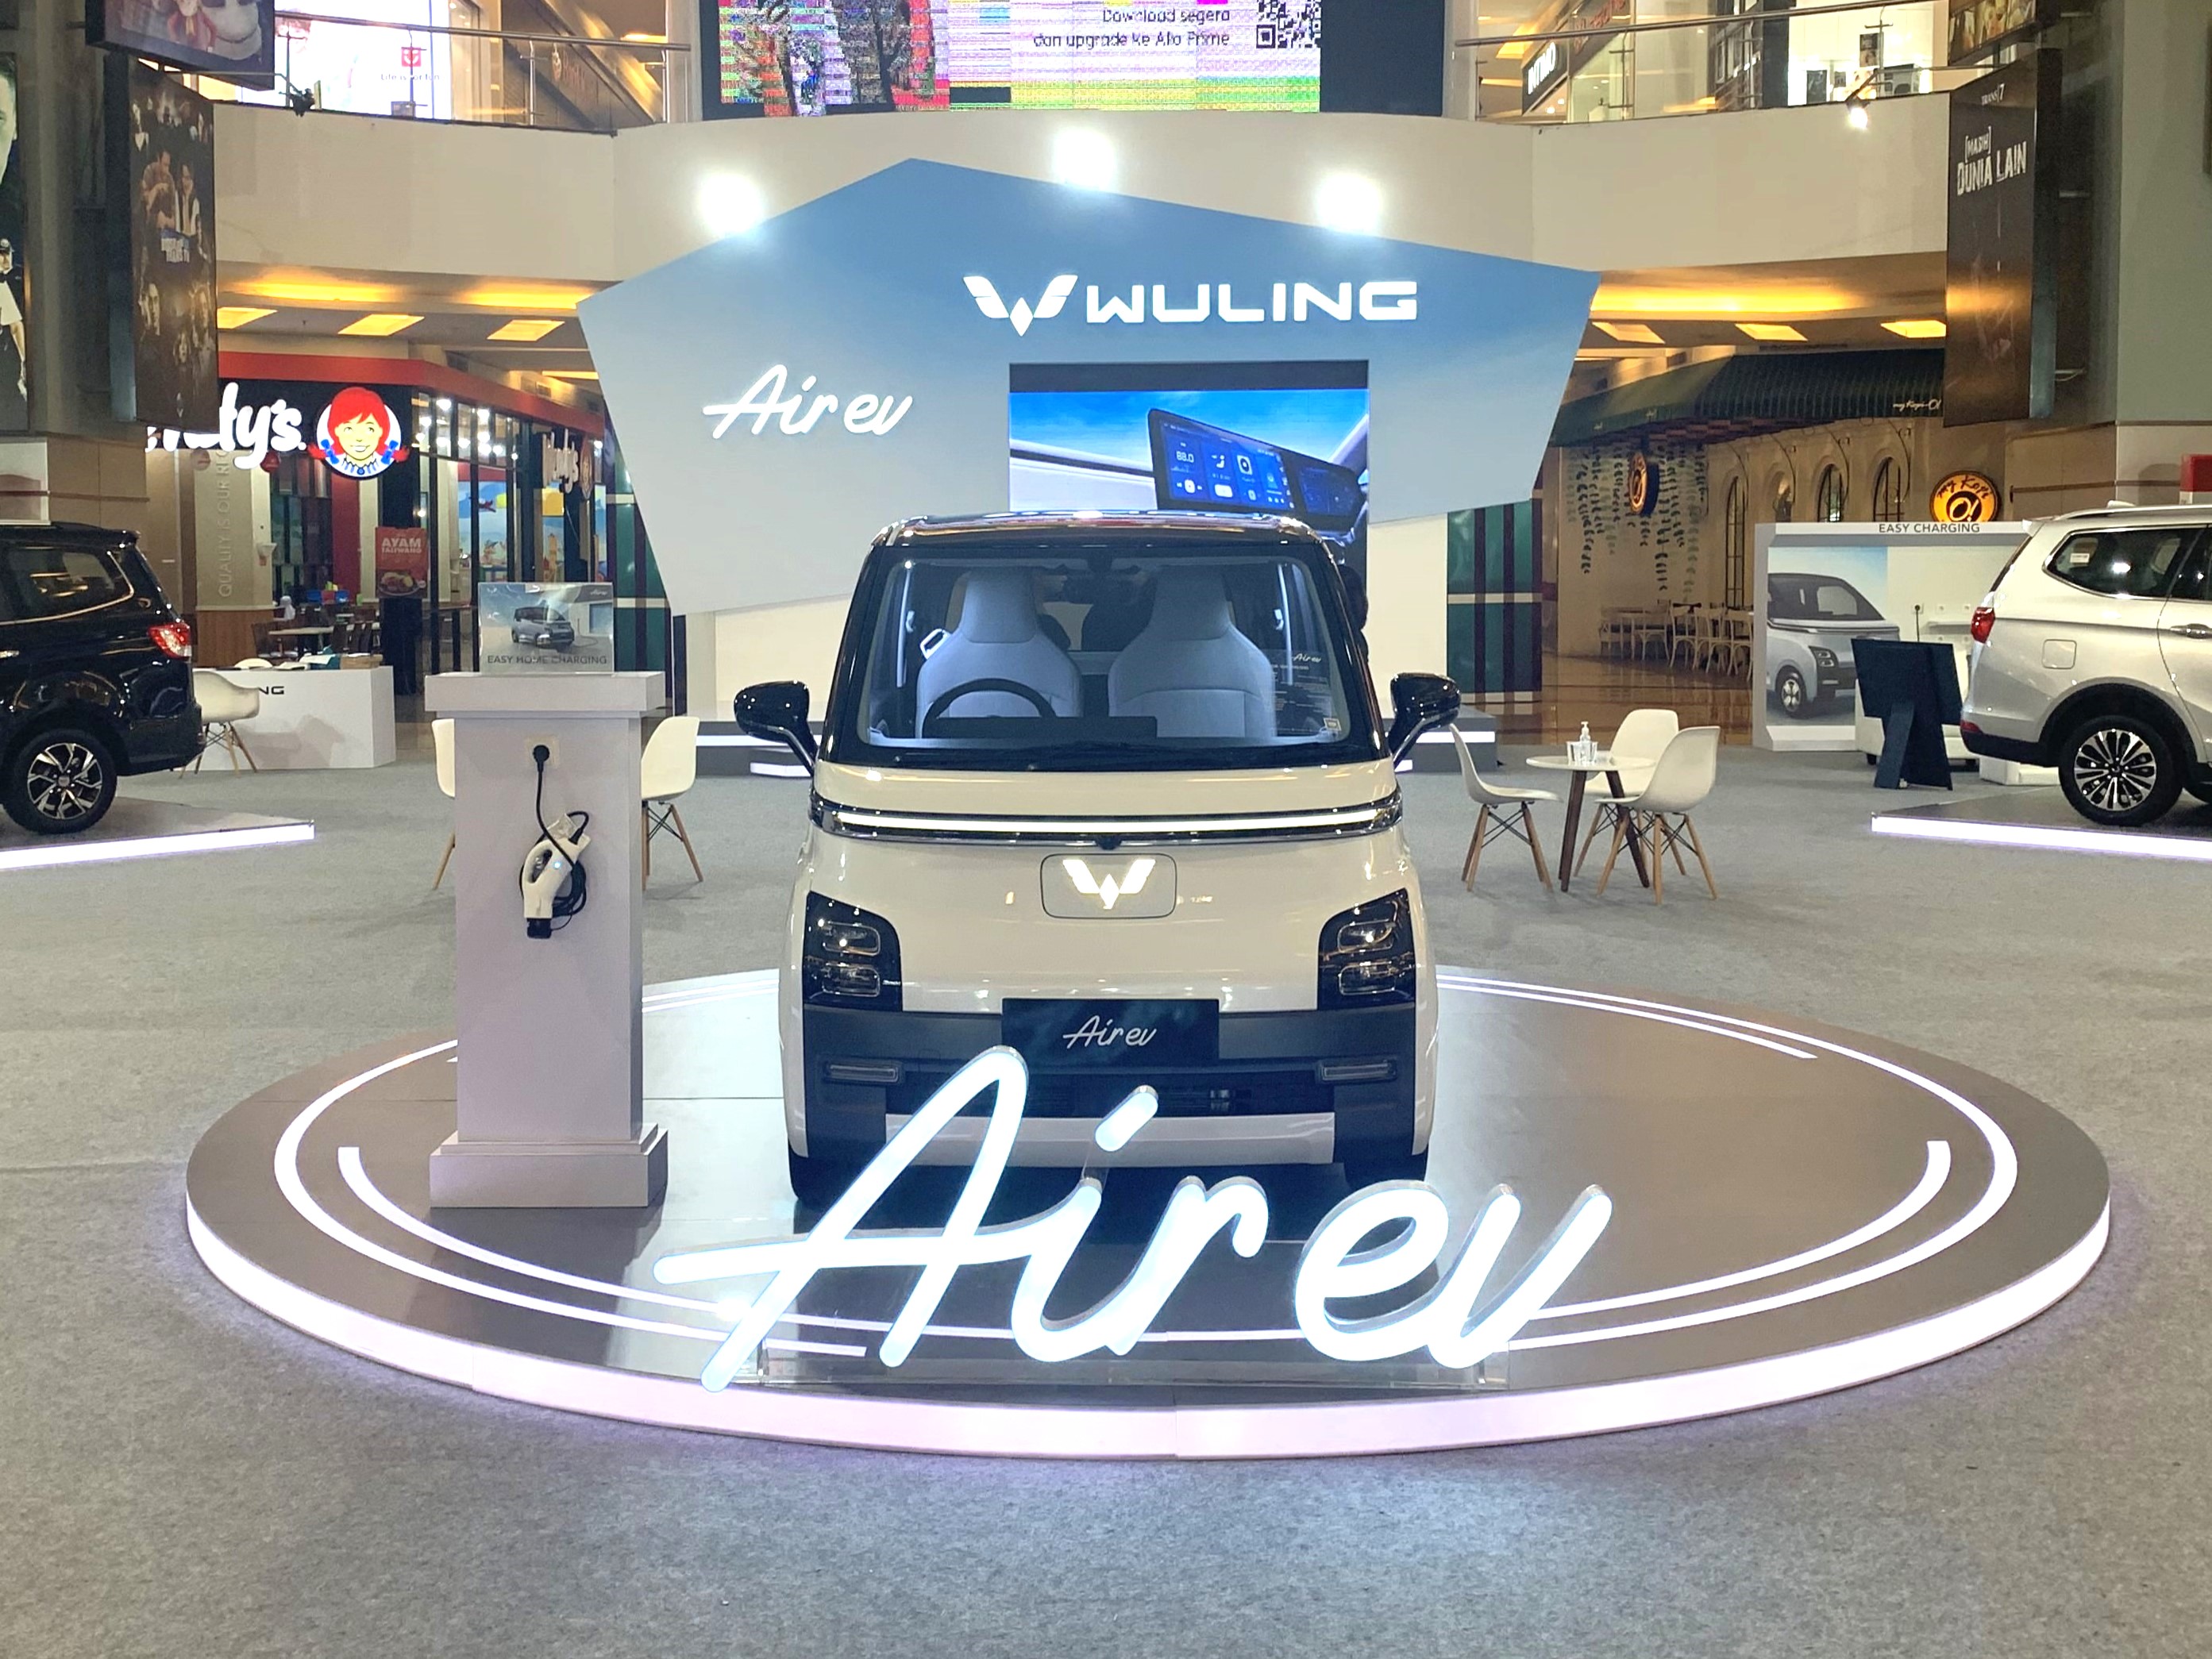 Image Wuling Officially Introduces Its First Electric Vehicle, Air ev, In Makassar